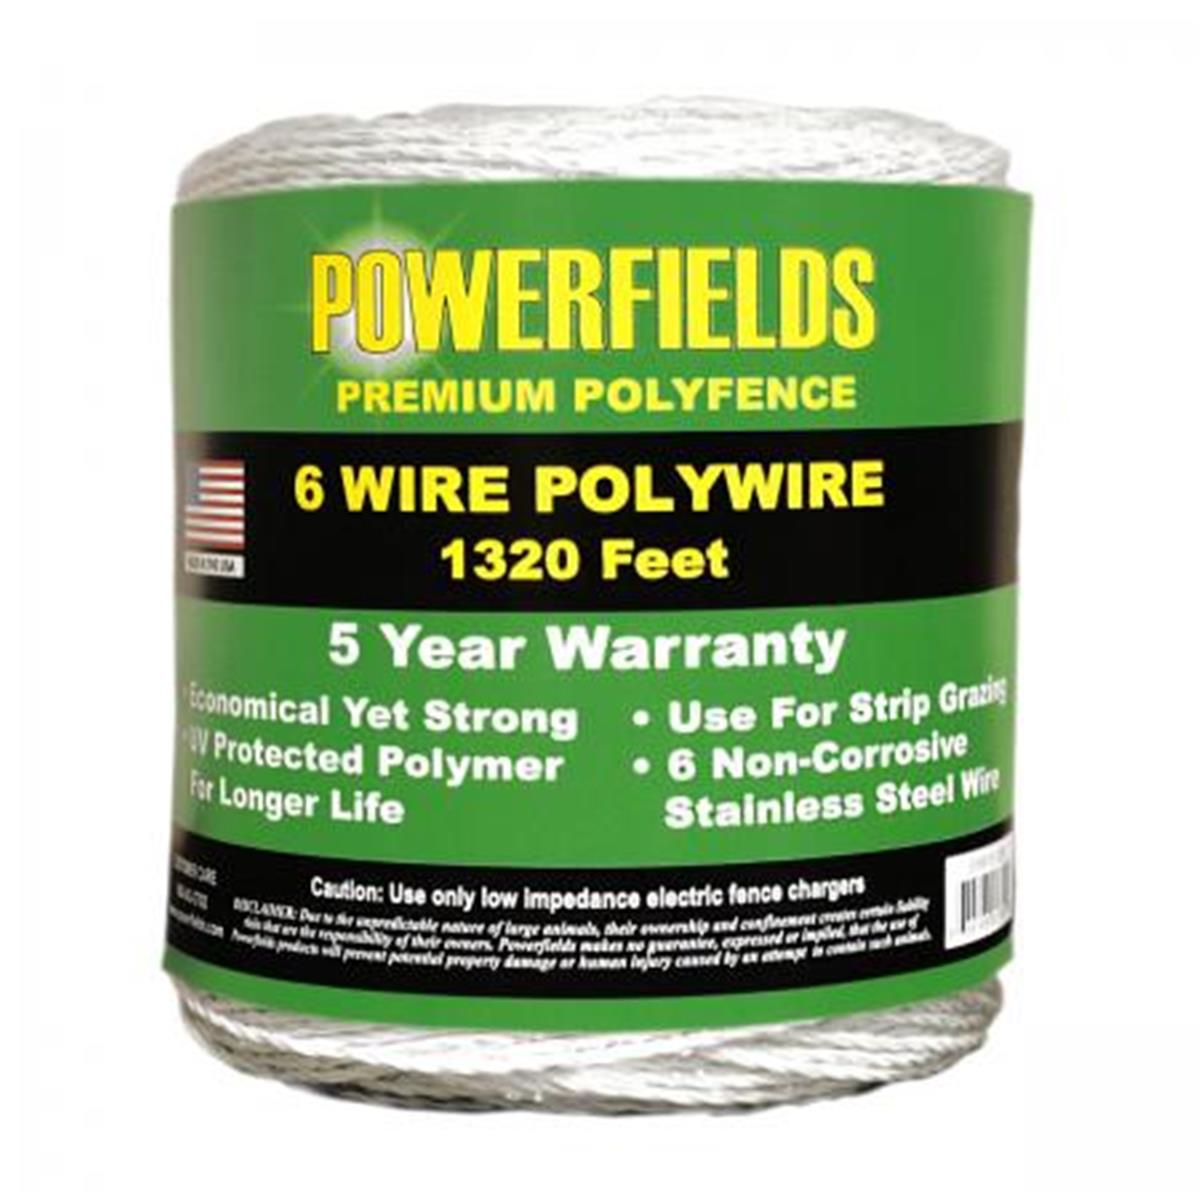 1382004 660 Ft. White 6-wire Polywire